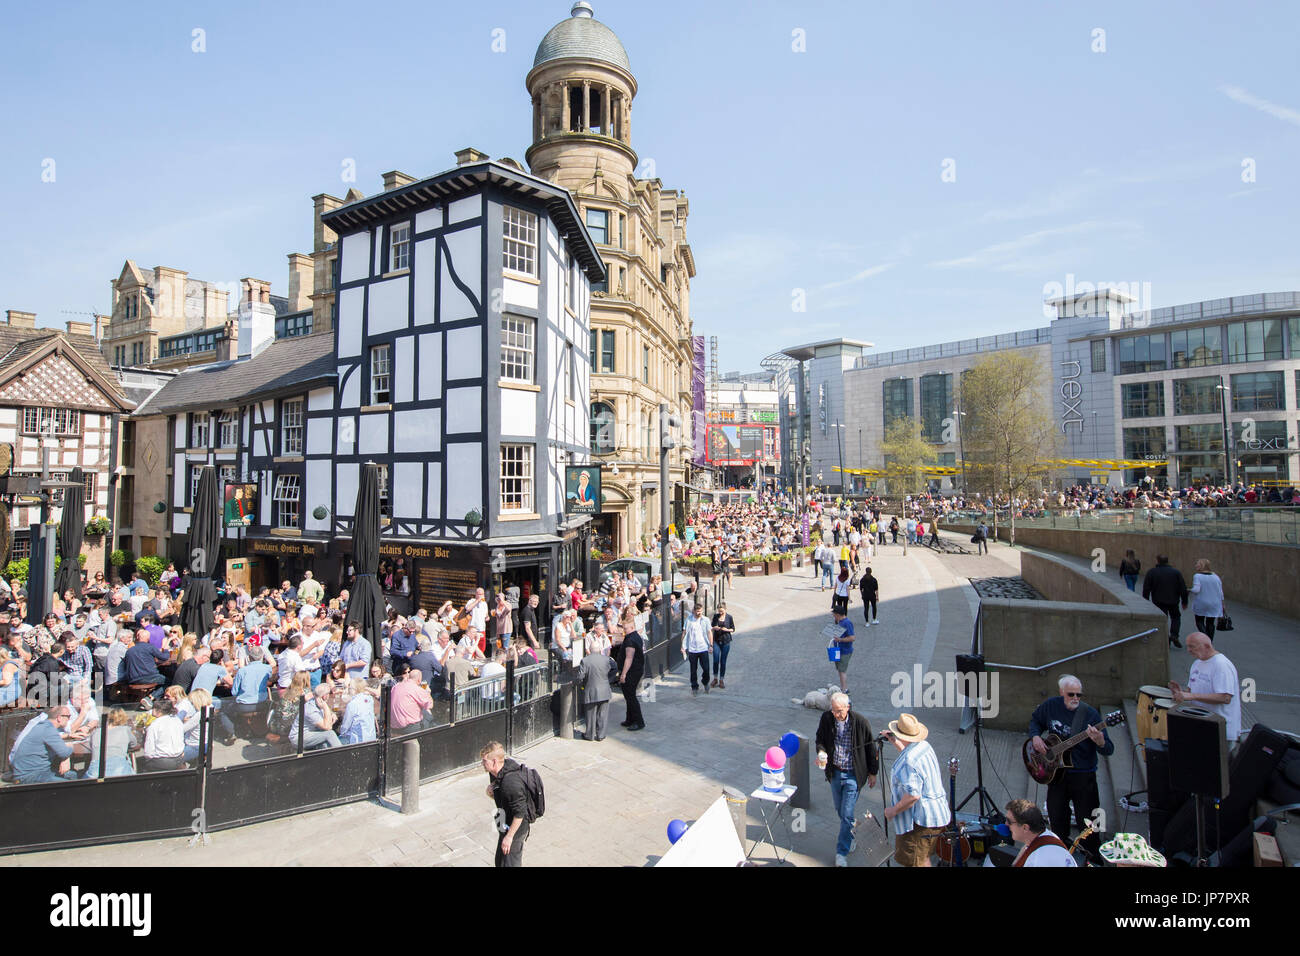 Two squares in central Manchester, Shambles and Exchange. Stock Photo